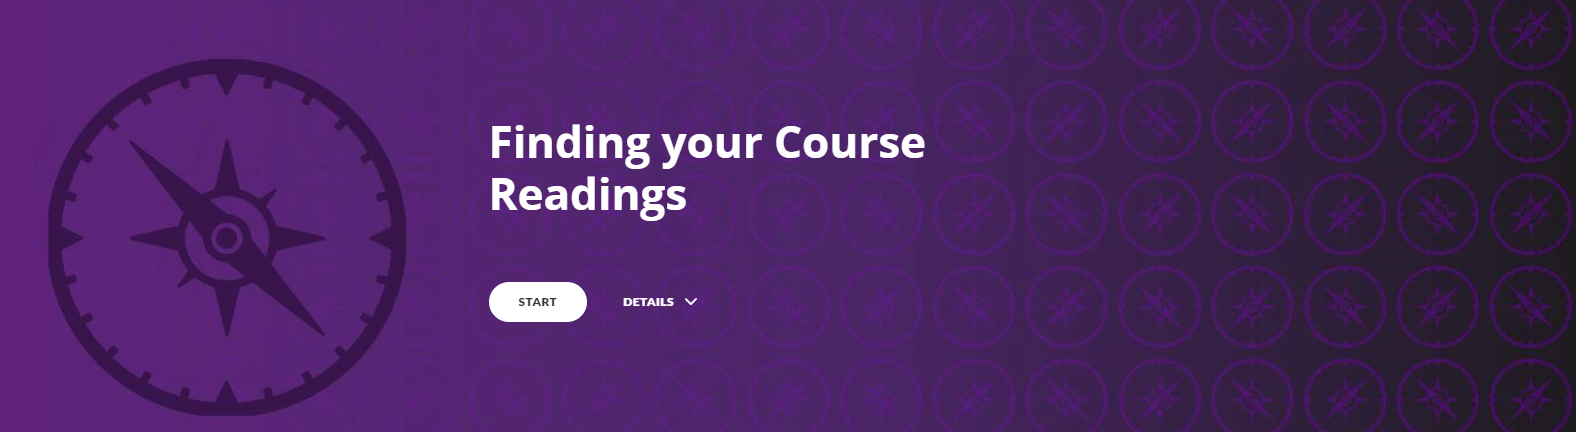 How to find your course readings